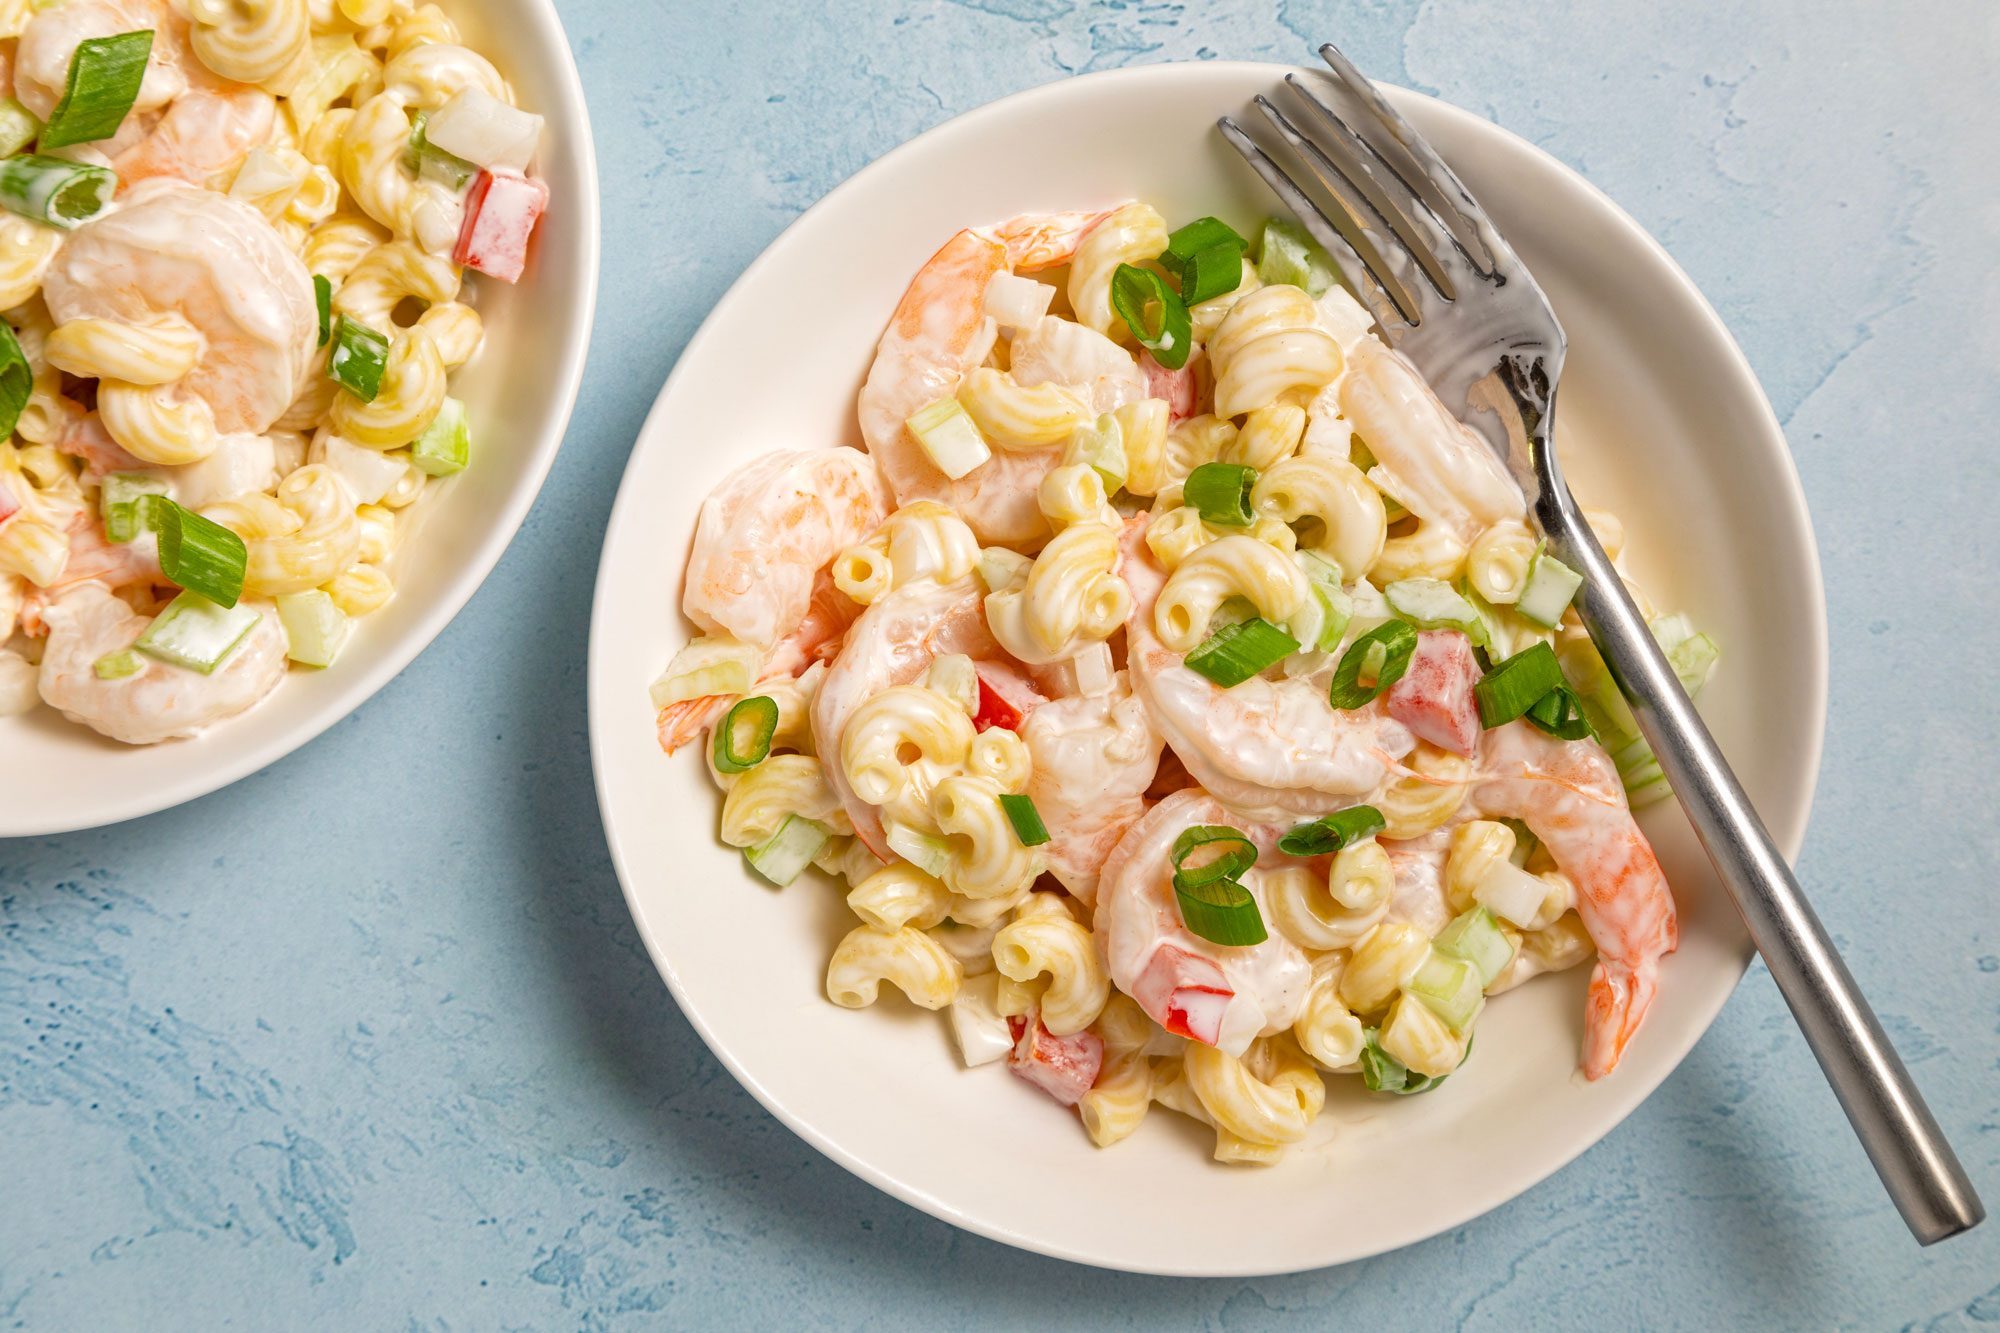 Two plates of Tasty Shrimp Pasta Salad served on small plates with cutlery